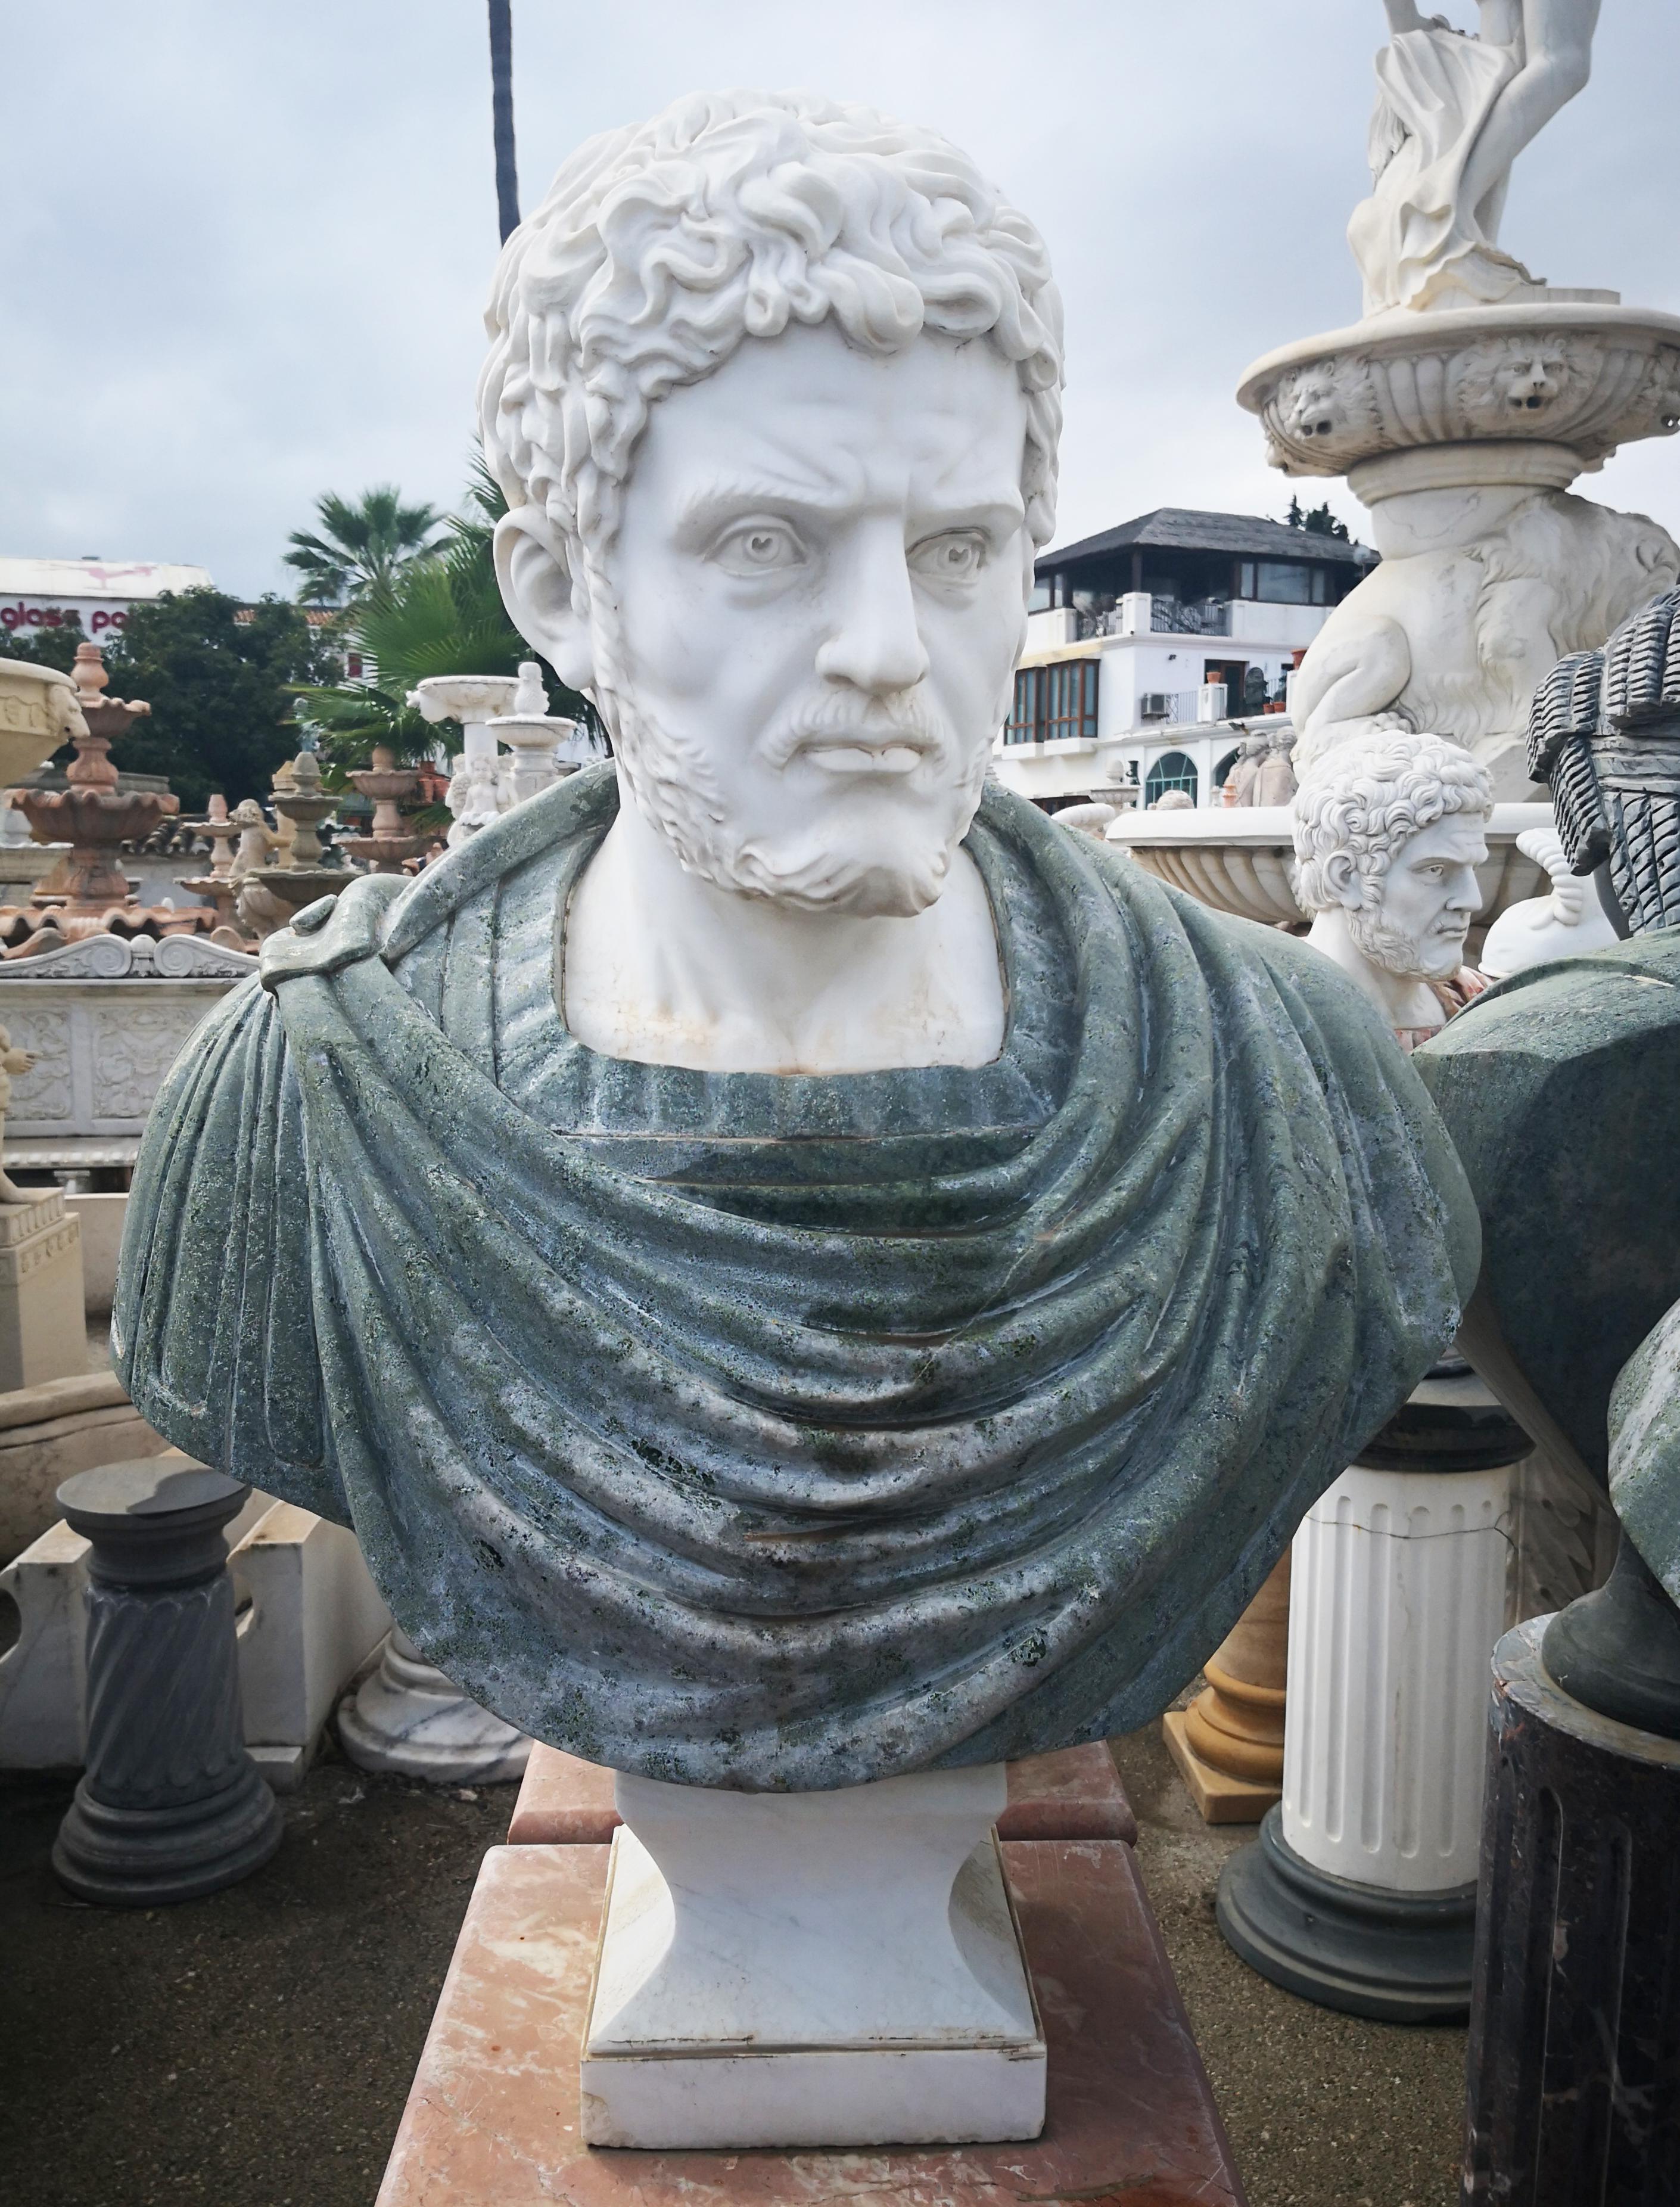 Bust of Roman emperor Hadrian in Carrara white and serpentine green marbles.